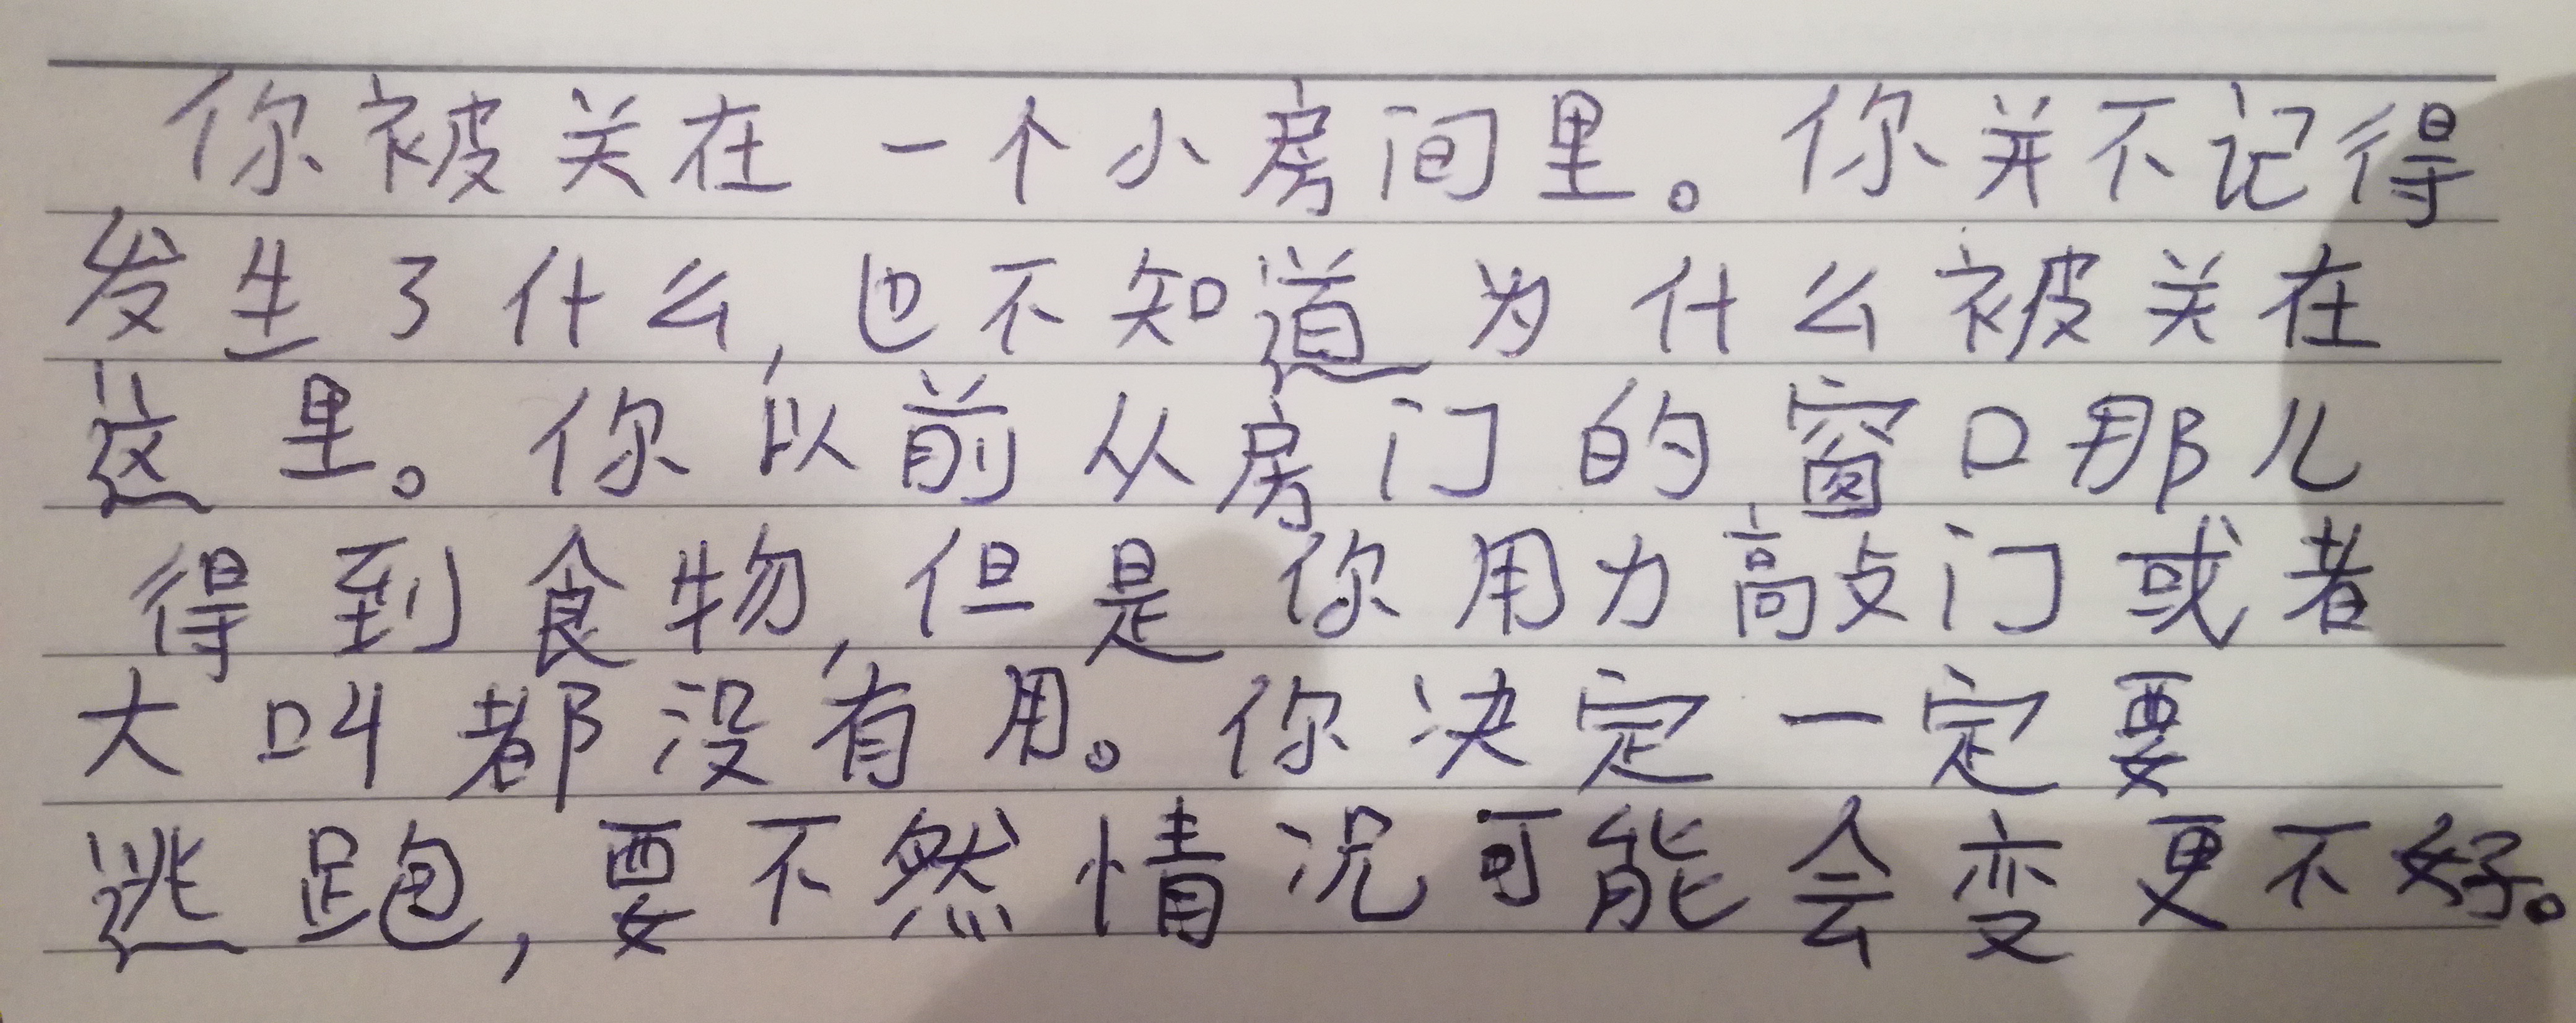 Chinese handwriting after three semesters of studying the language in China.